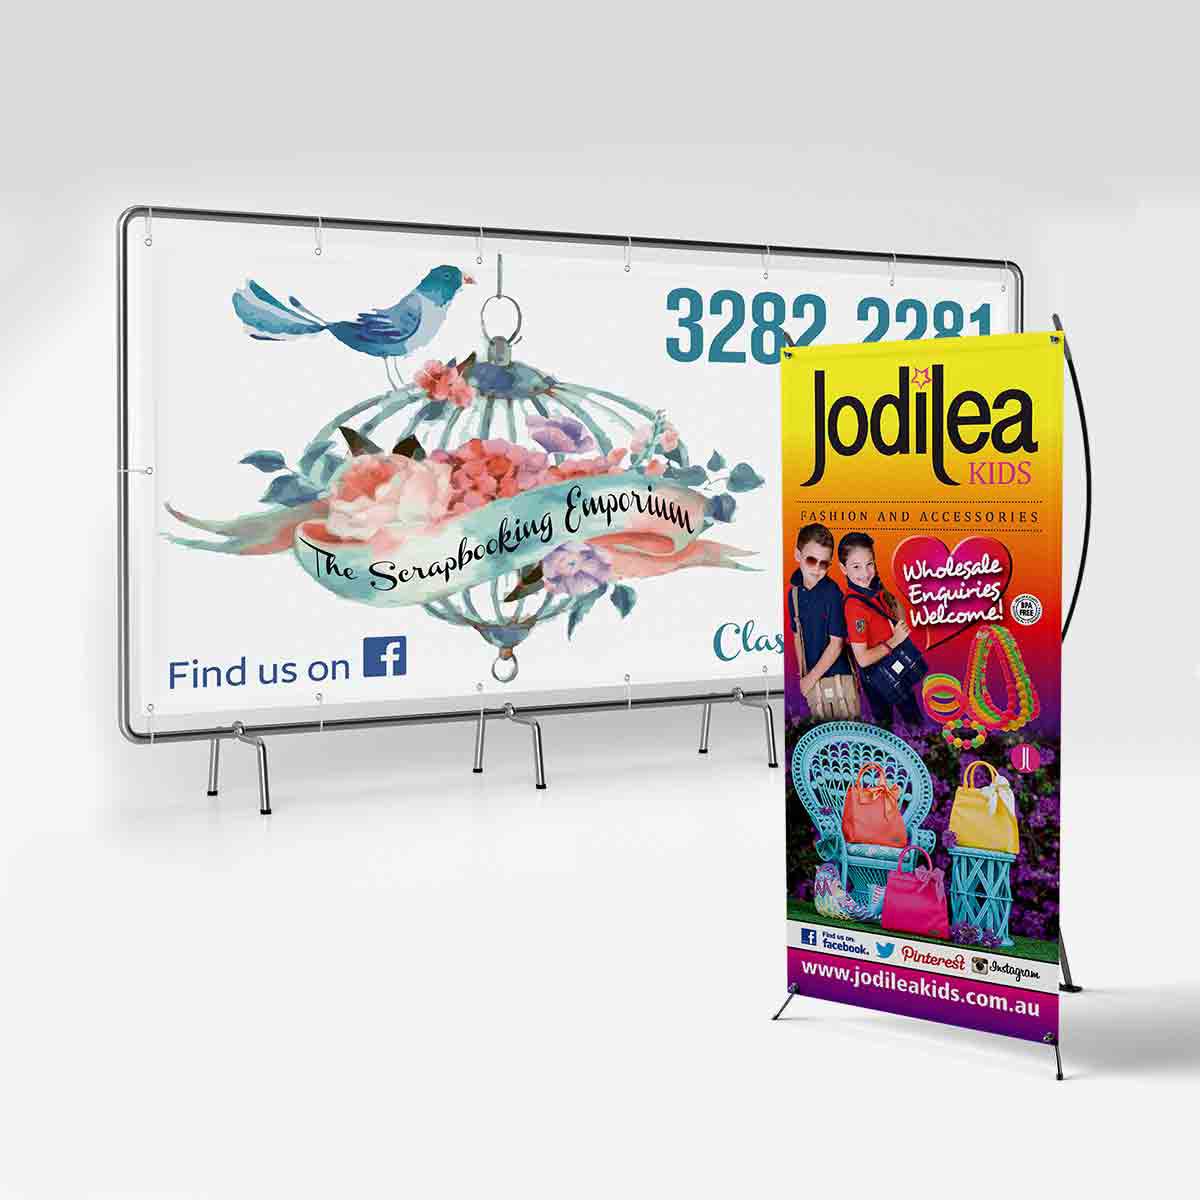 Advertising banners designed by Linda Butler of GGA Graphics